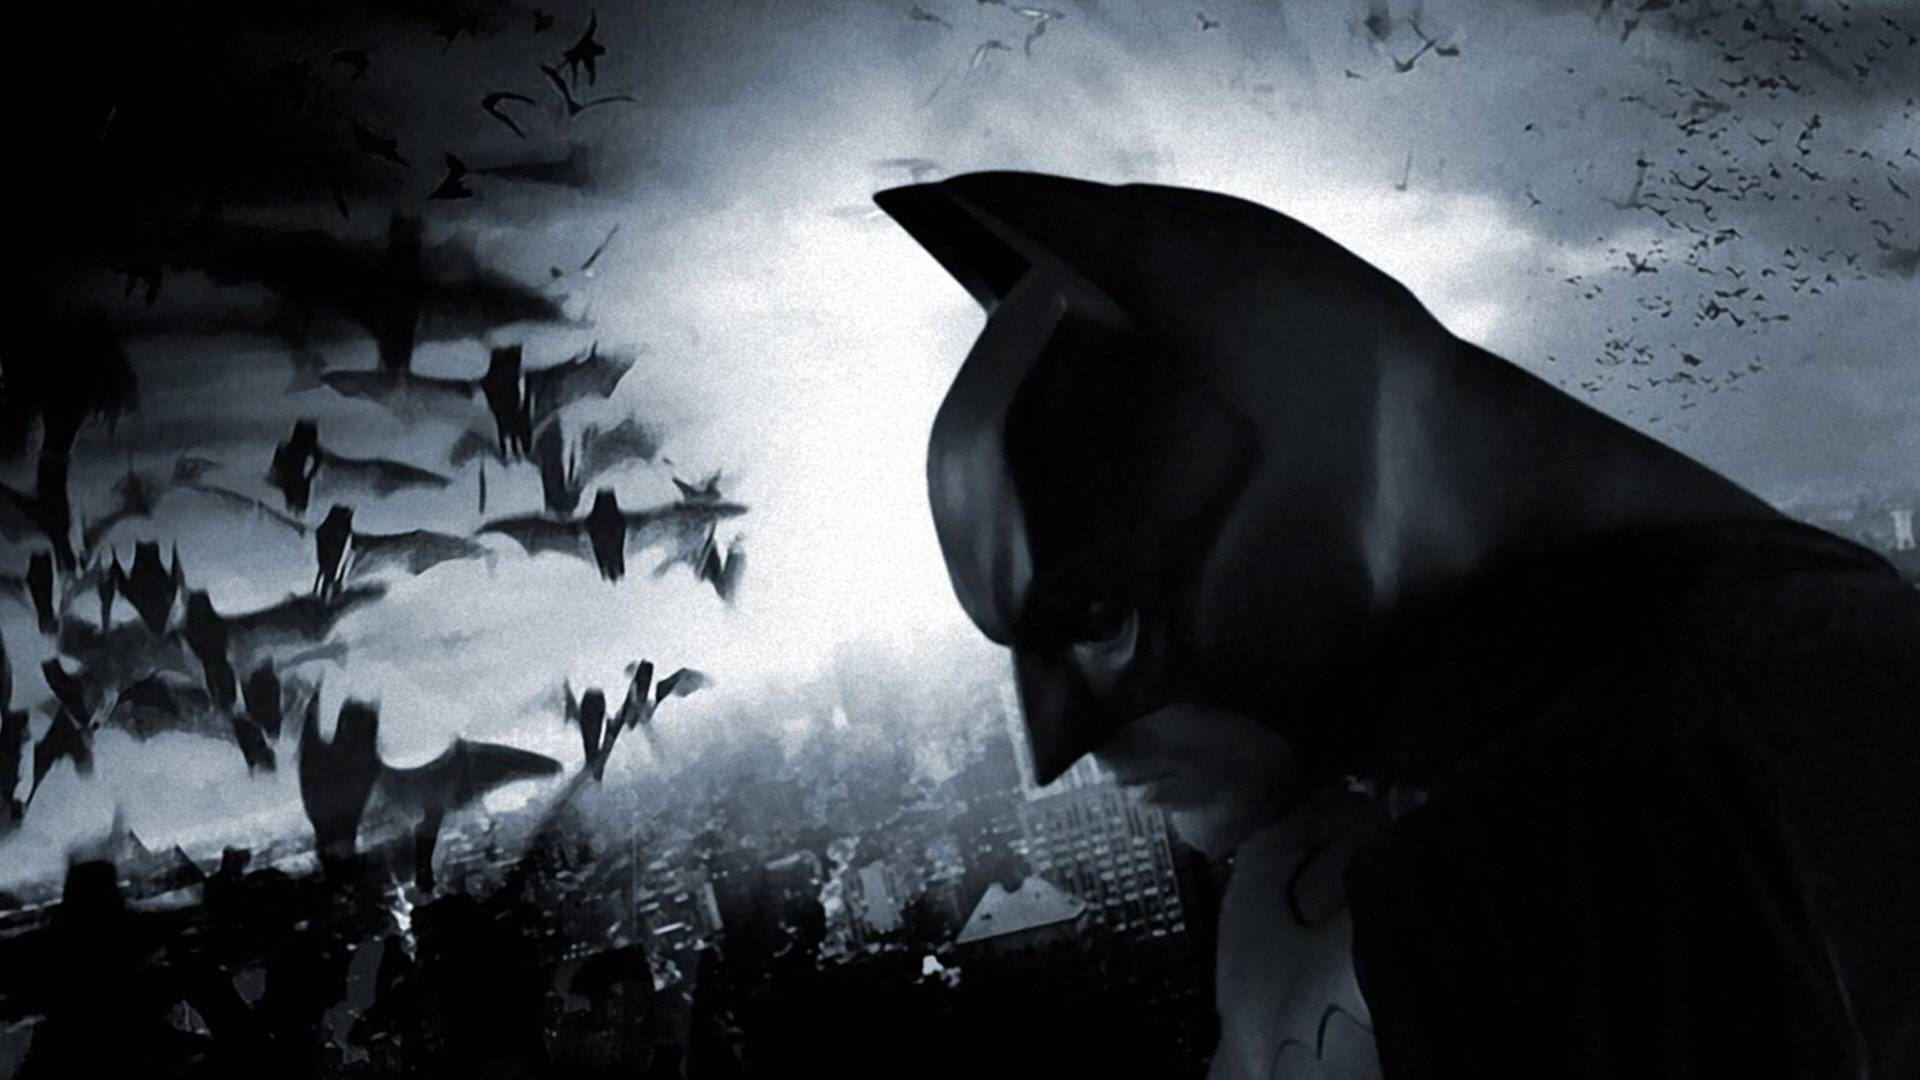 Batman wallpaper hd for android free download